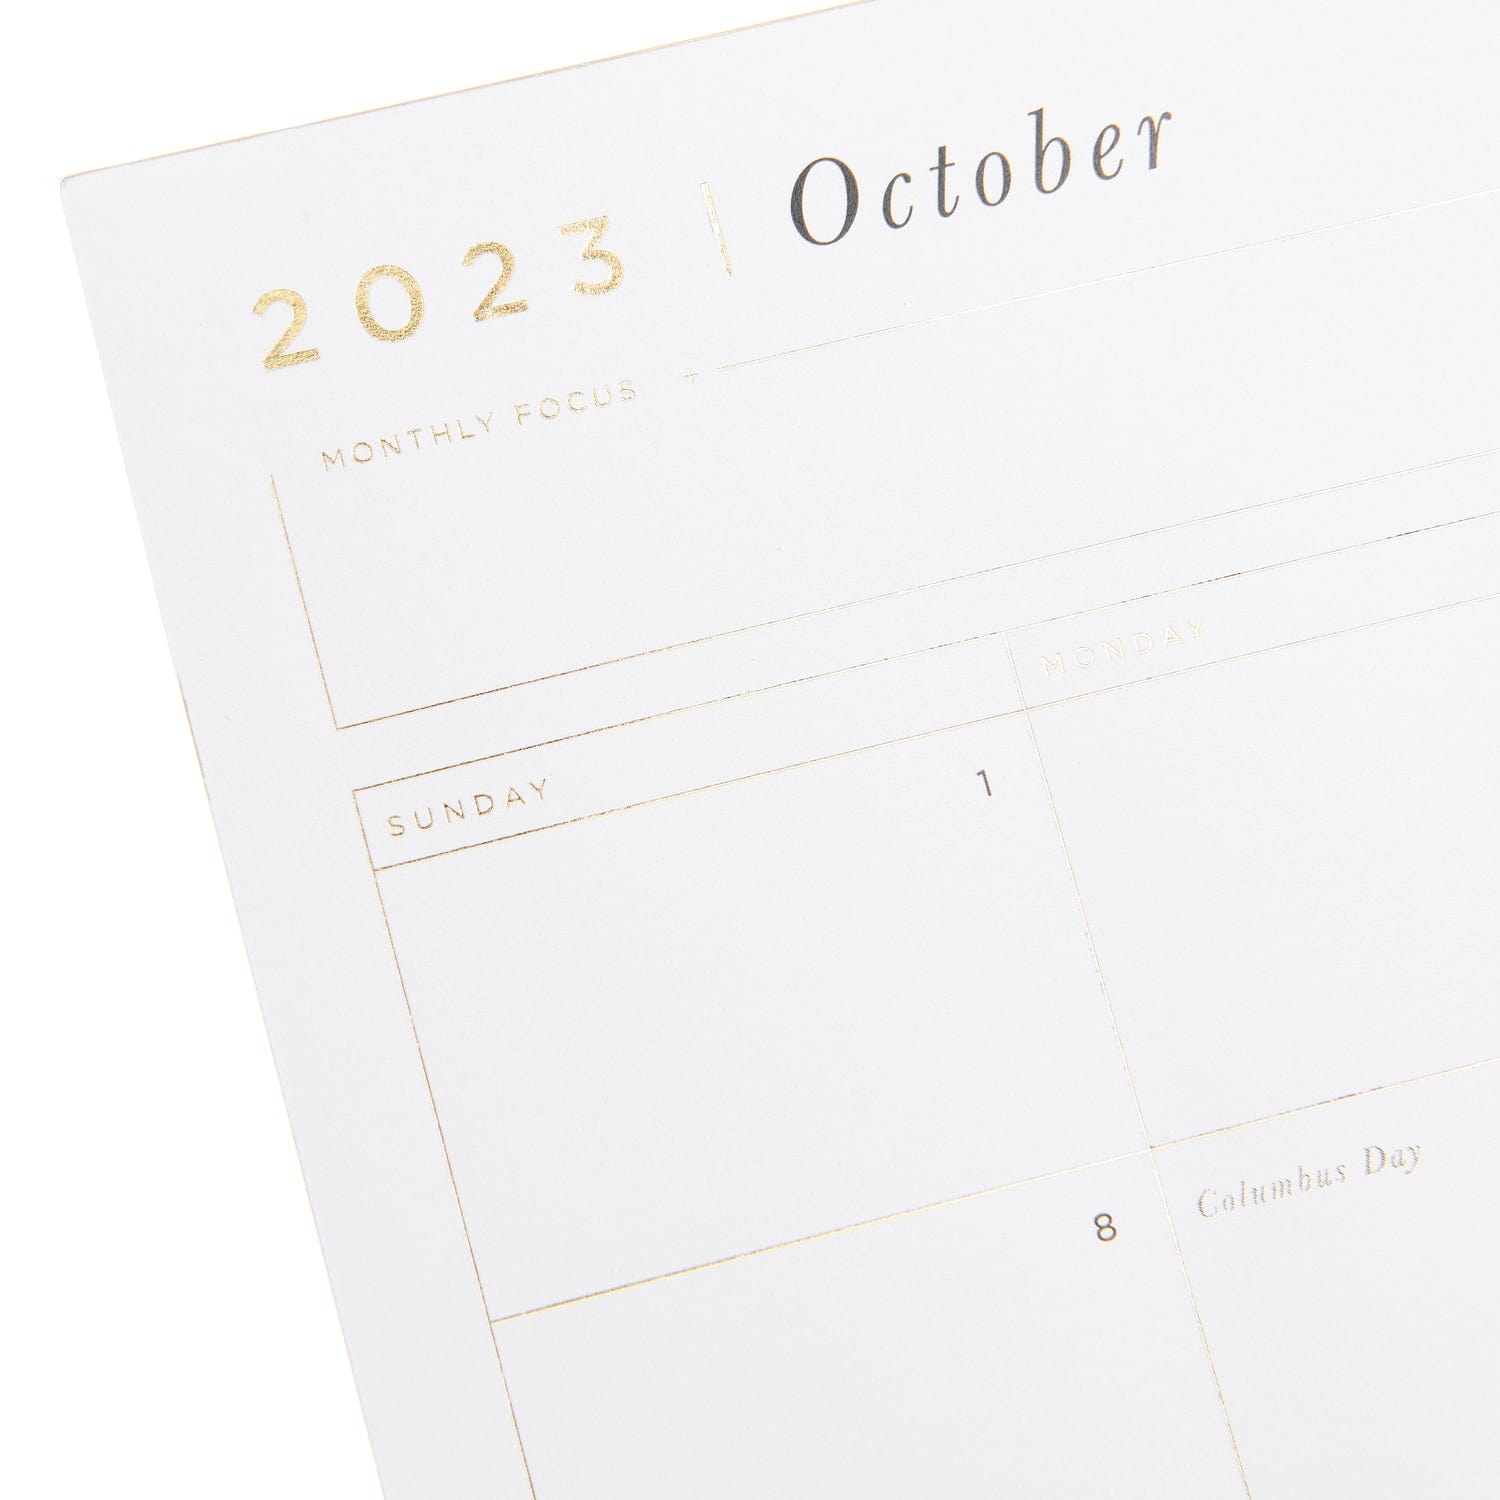 2023-2024 Planner Refills, 2023 2024 Weekly & Monthly Planner Refills for A6 Binder, Runs from July 2023 to June 2024, 6-Hole Refill Planner with